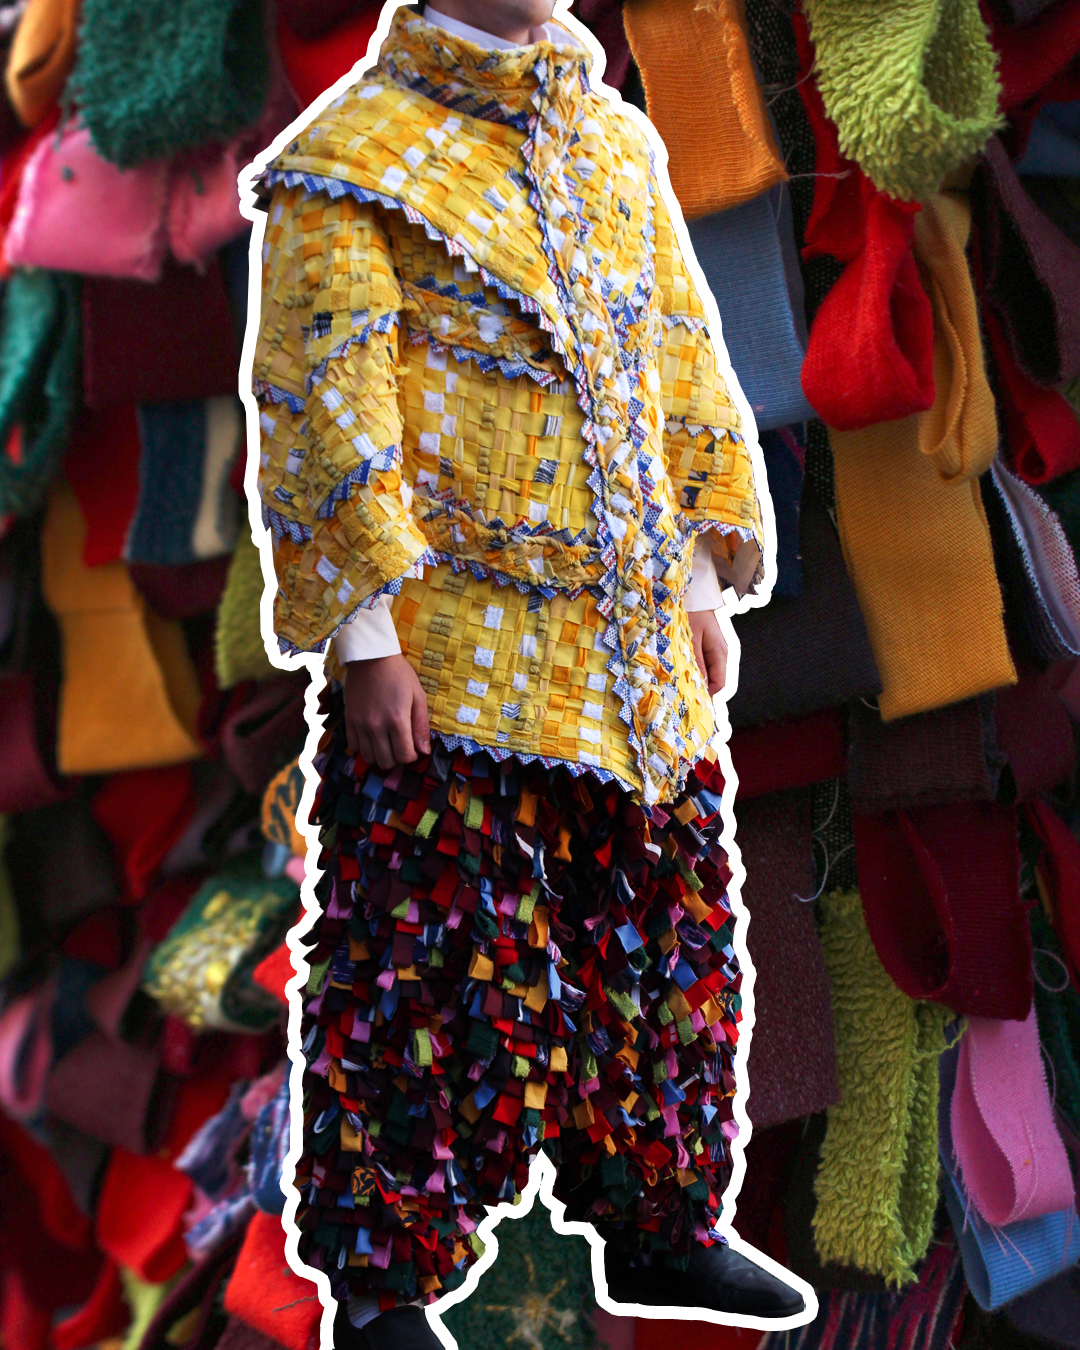 A photo of one of the characters made into a real outfit. A jacket made up of panels of yellow and white rags woven into a basket type surface. Poofy trousers made out of a myriad of short, colourful rag loops. The jacket has edge detailing made out of pale red and blue plastic, creating a zig-zag pattern.